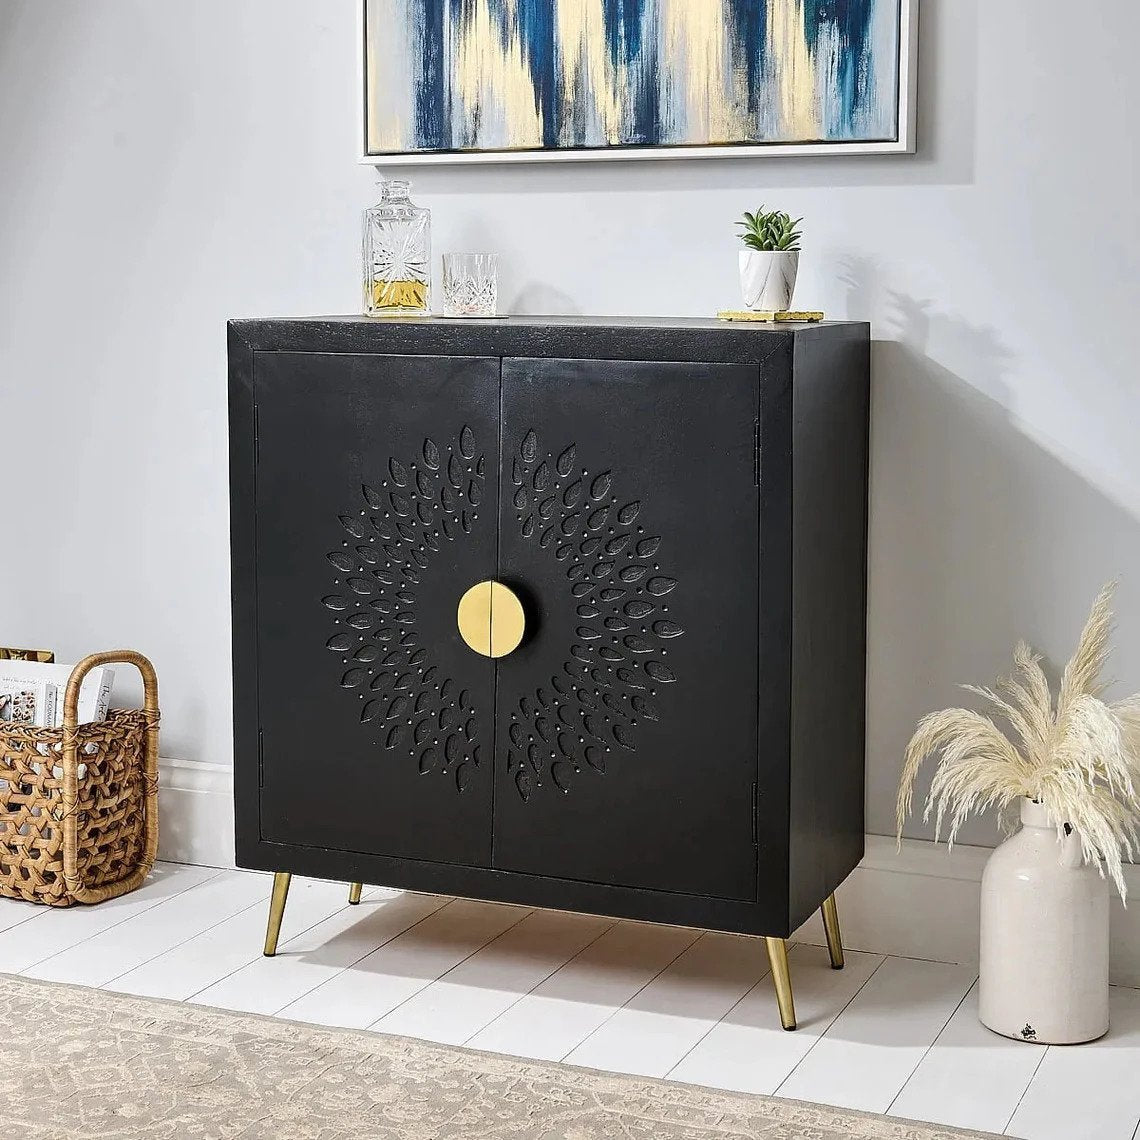 Beautiful Display Caning Bohemian Style Cabinet | Carved Wood Sideboard Storage with Two Shelves Cabinet - Bone Inlay Furnitures